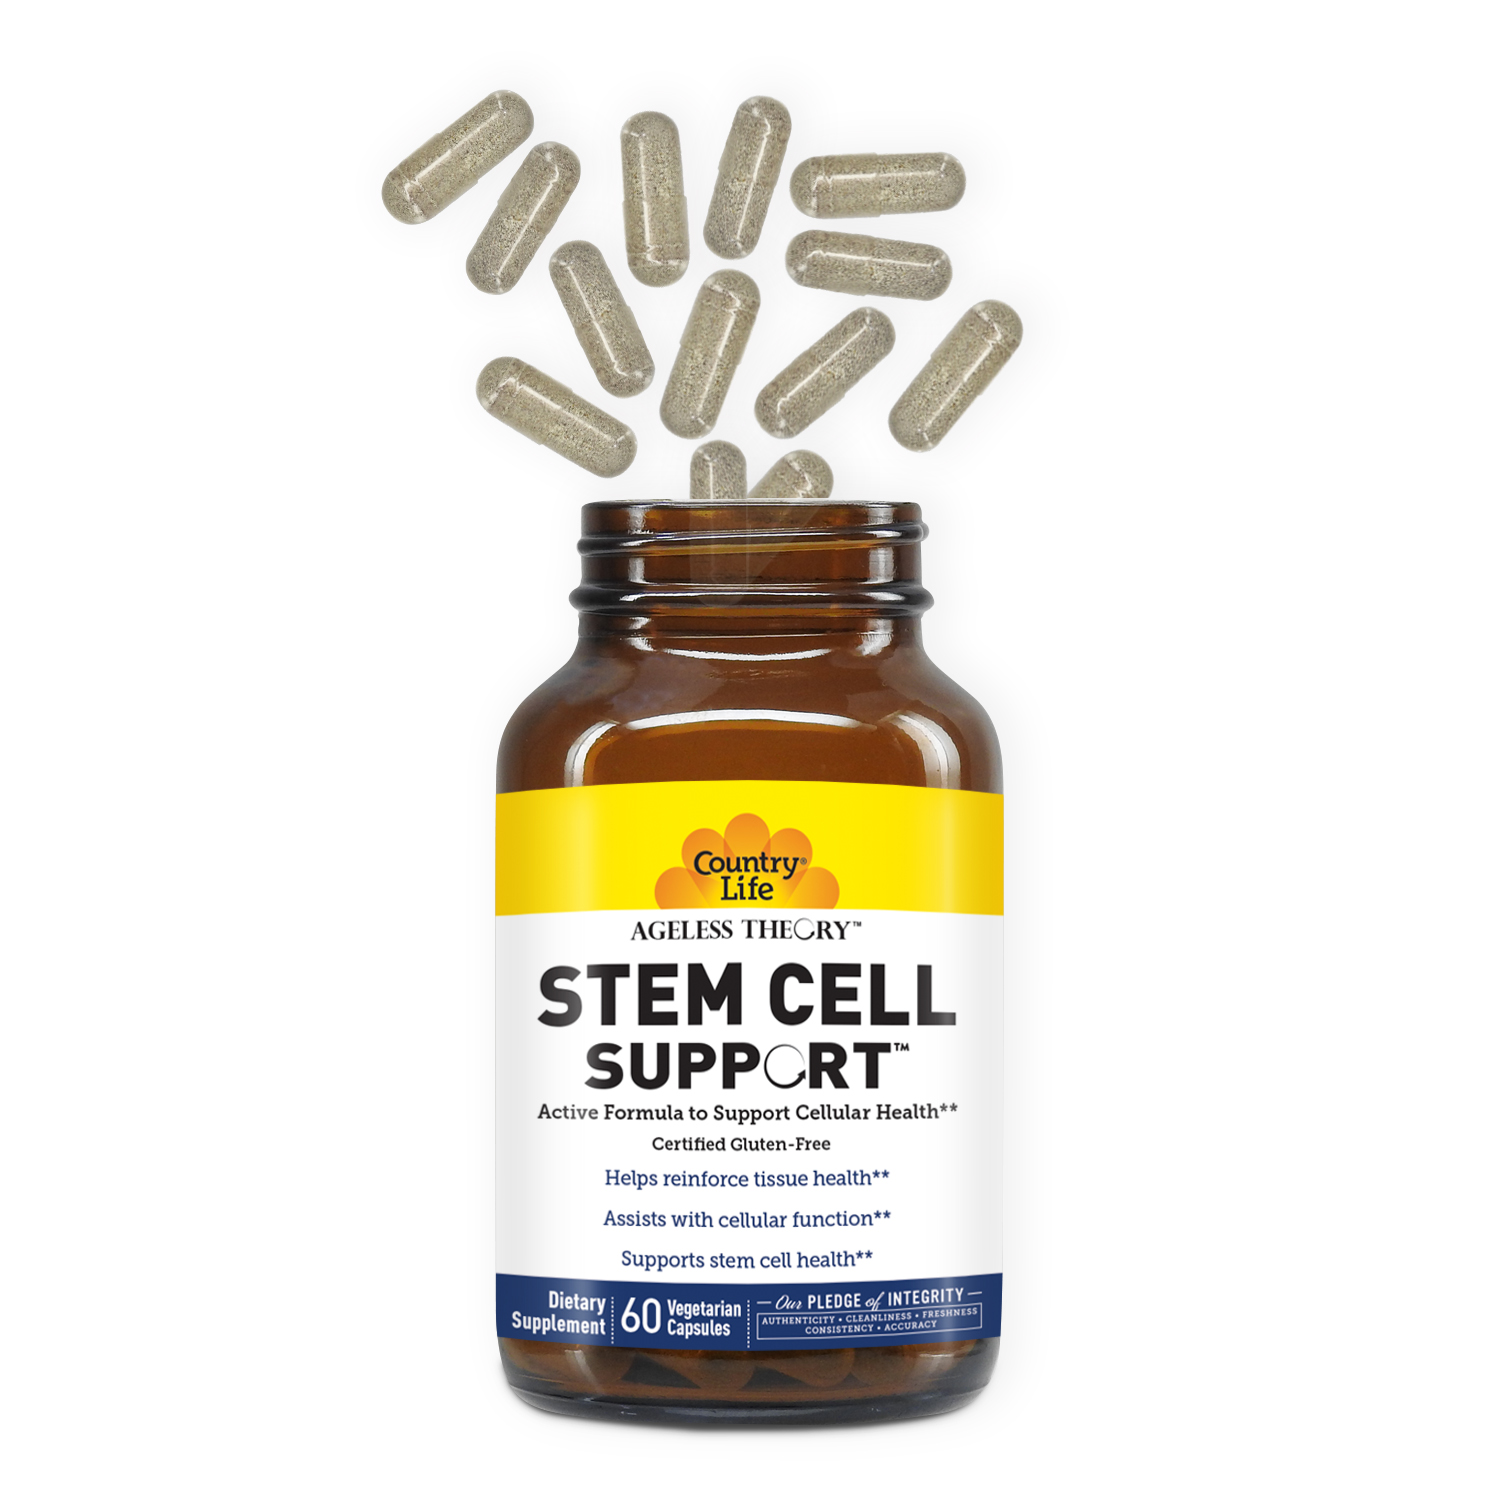 Ageless Theory™ Stem Cell Support™